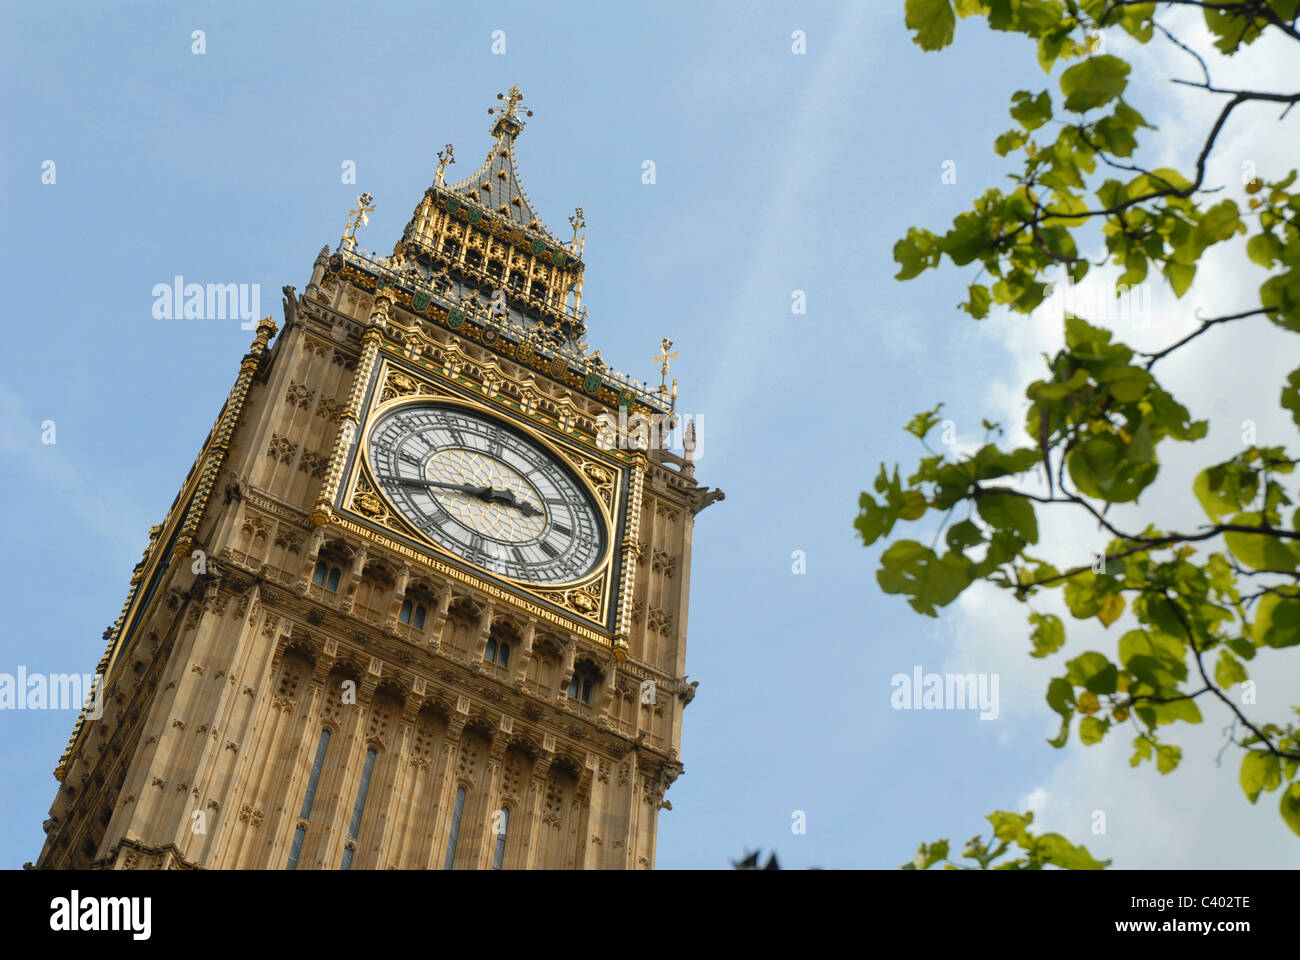 This is an image of Big Ben clock at the Houses of Parliament, UK Stock Photo